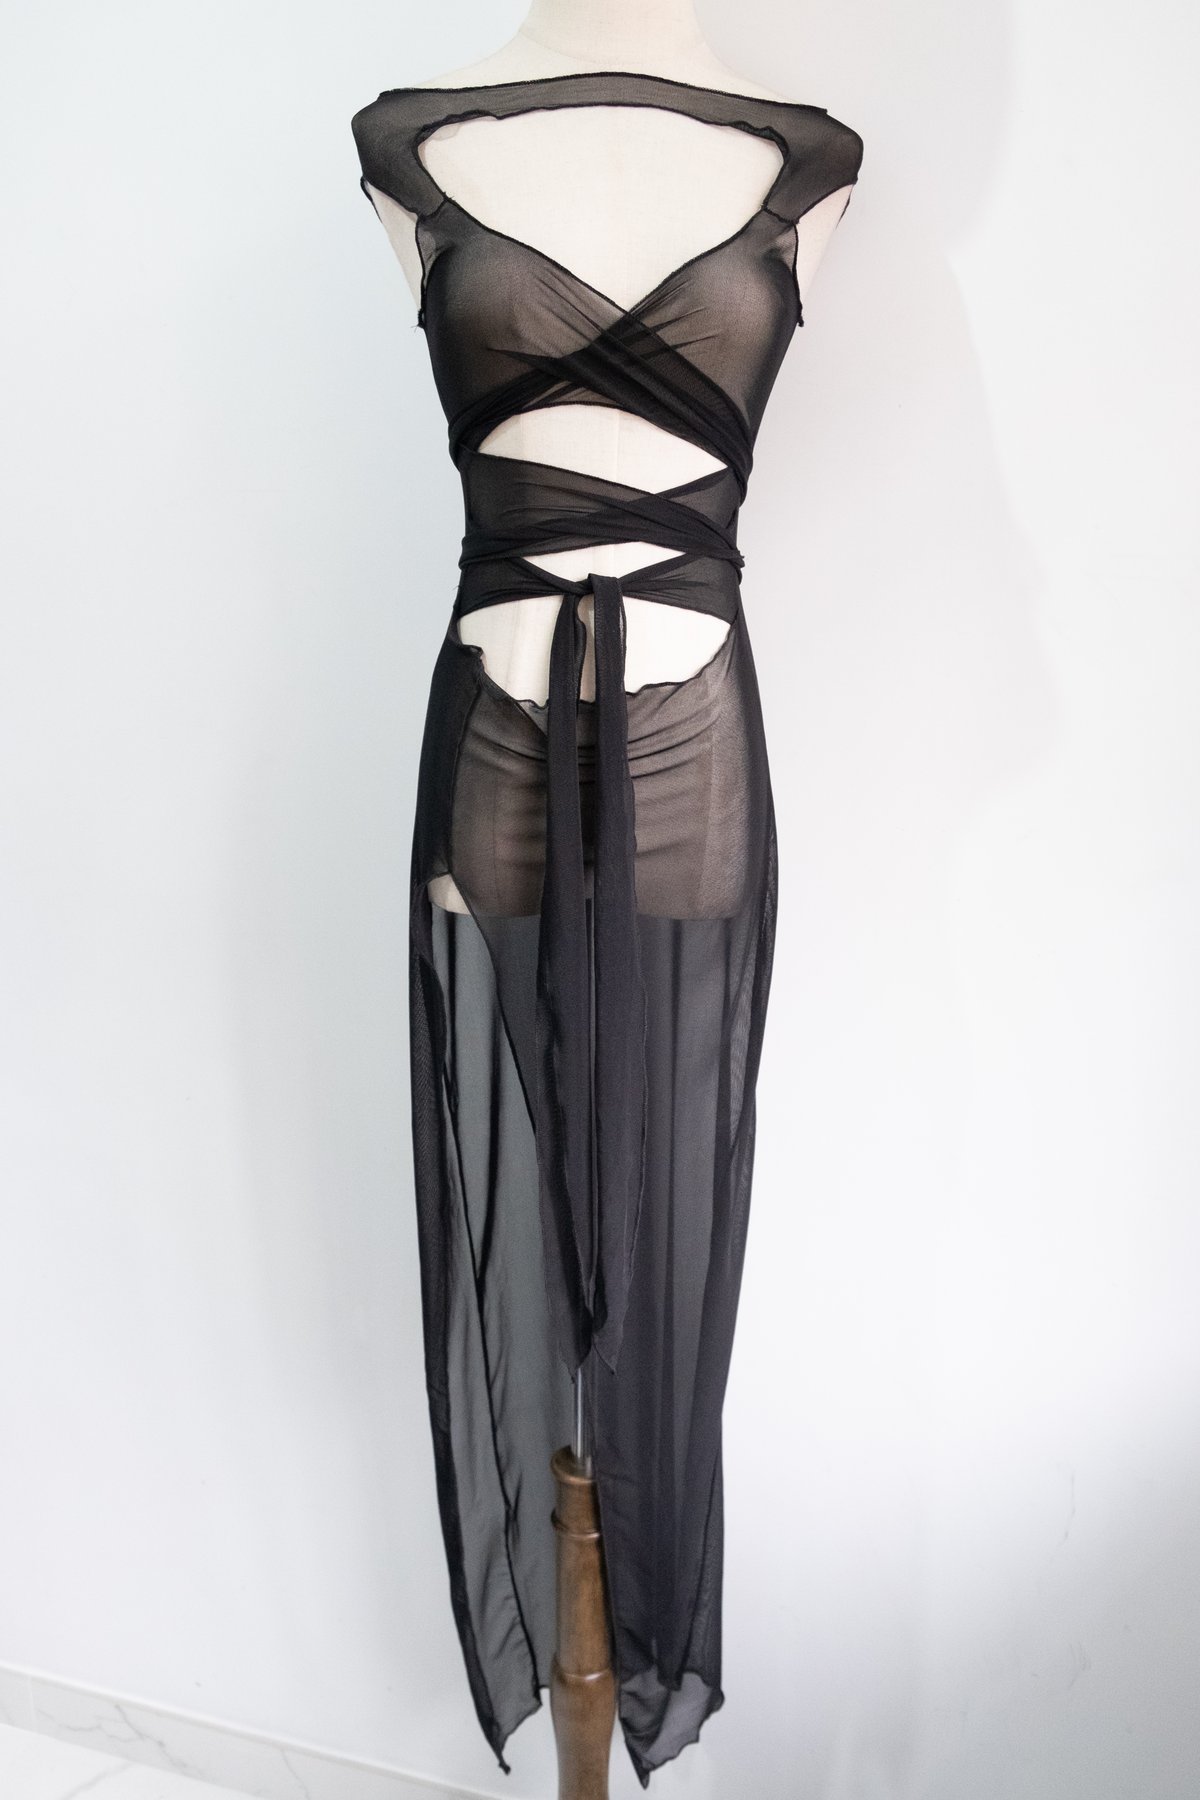 Image of SAMPLE SALE - Unreleased Sheer lace Up Dress